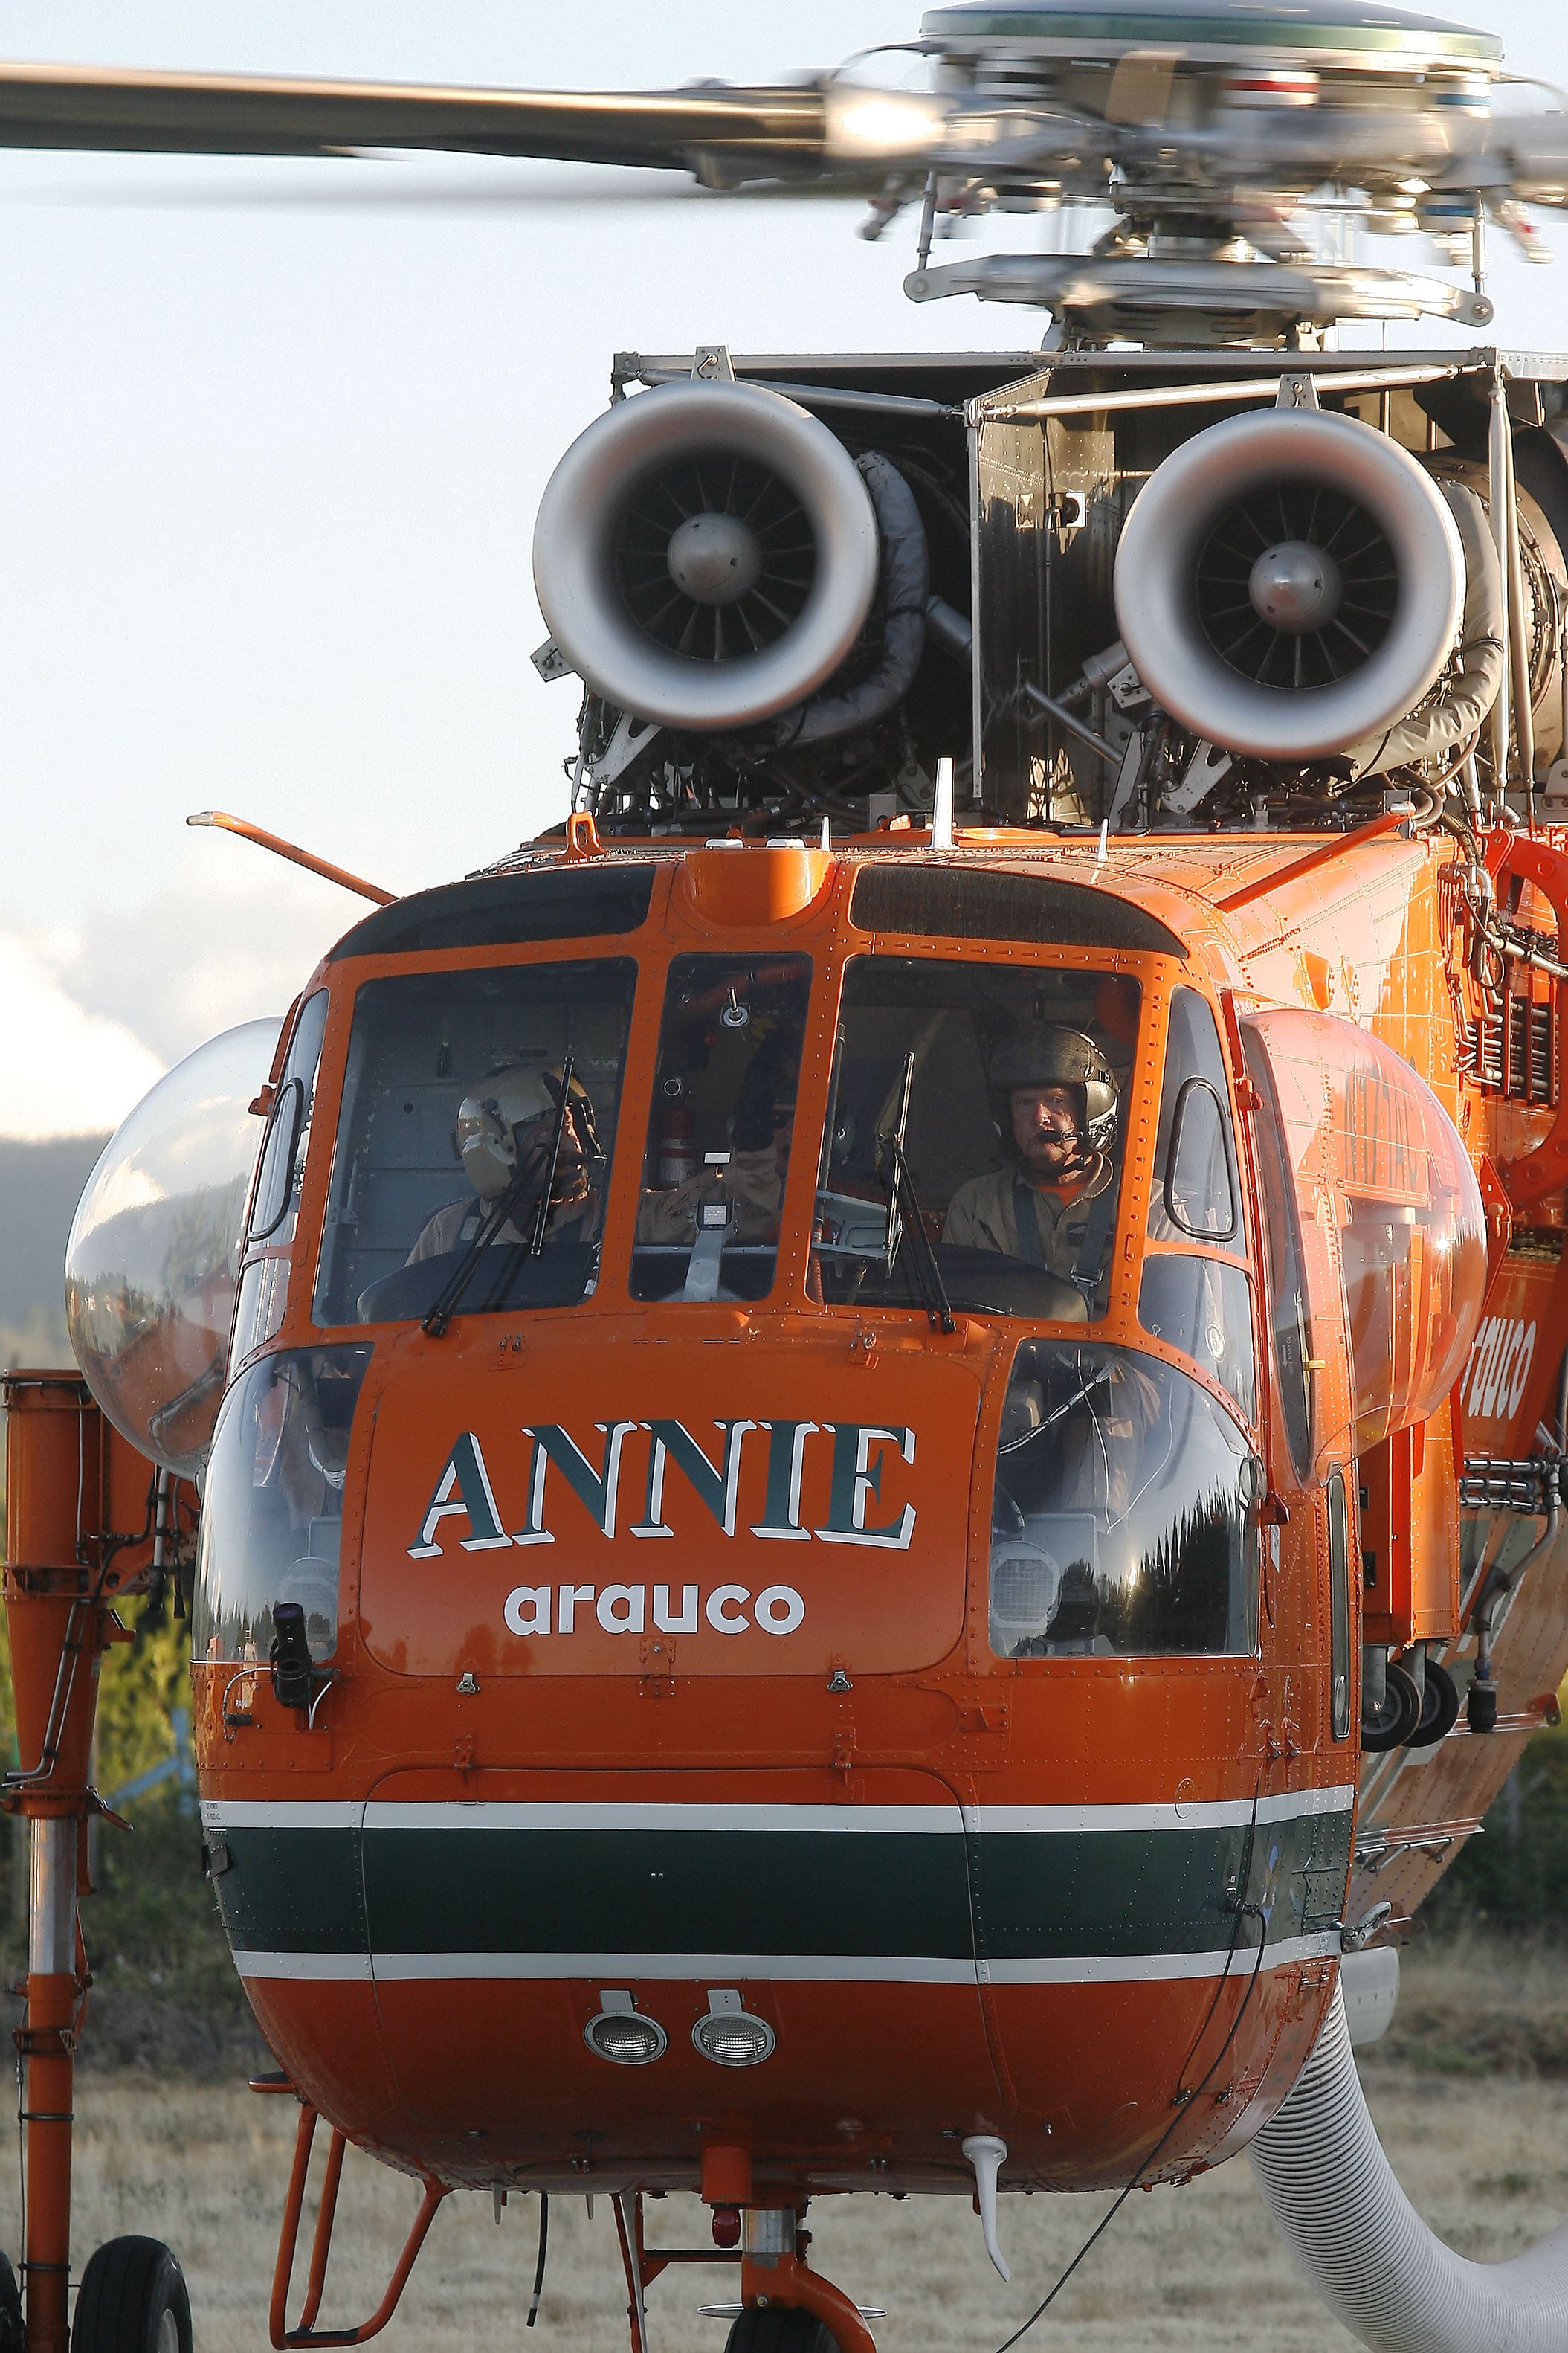 https://arauco.com/chile/wp-content/uploads/sites/14/2018/11/Helicoptero-Annie-5-min.jpg